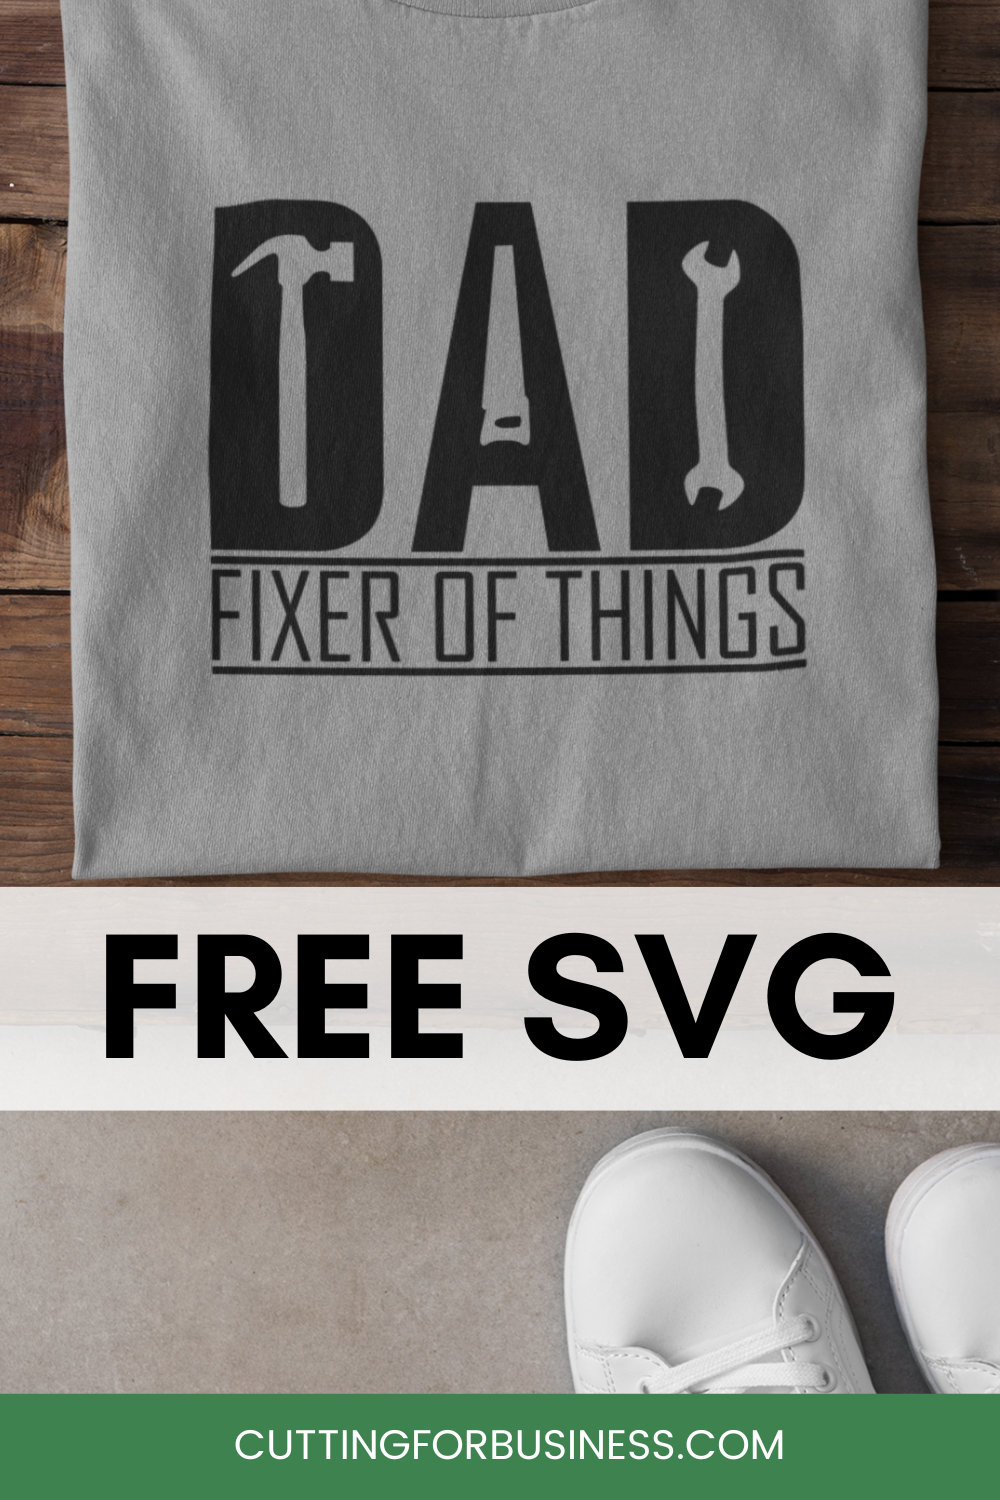 Free Father's Day SVG - Fixer of Things - cuttingforbusiness.com.